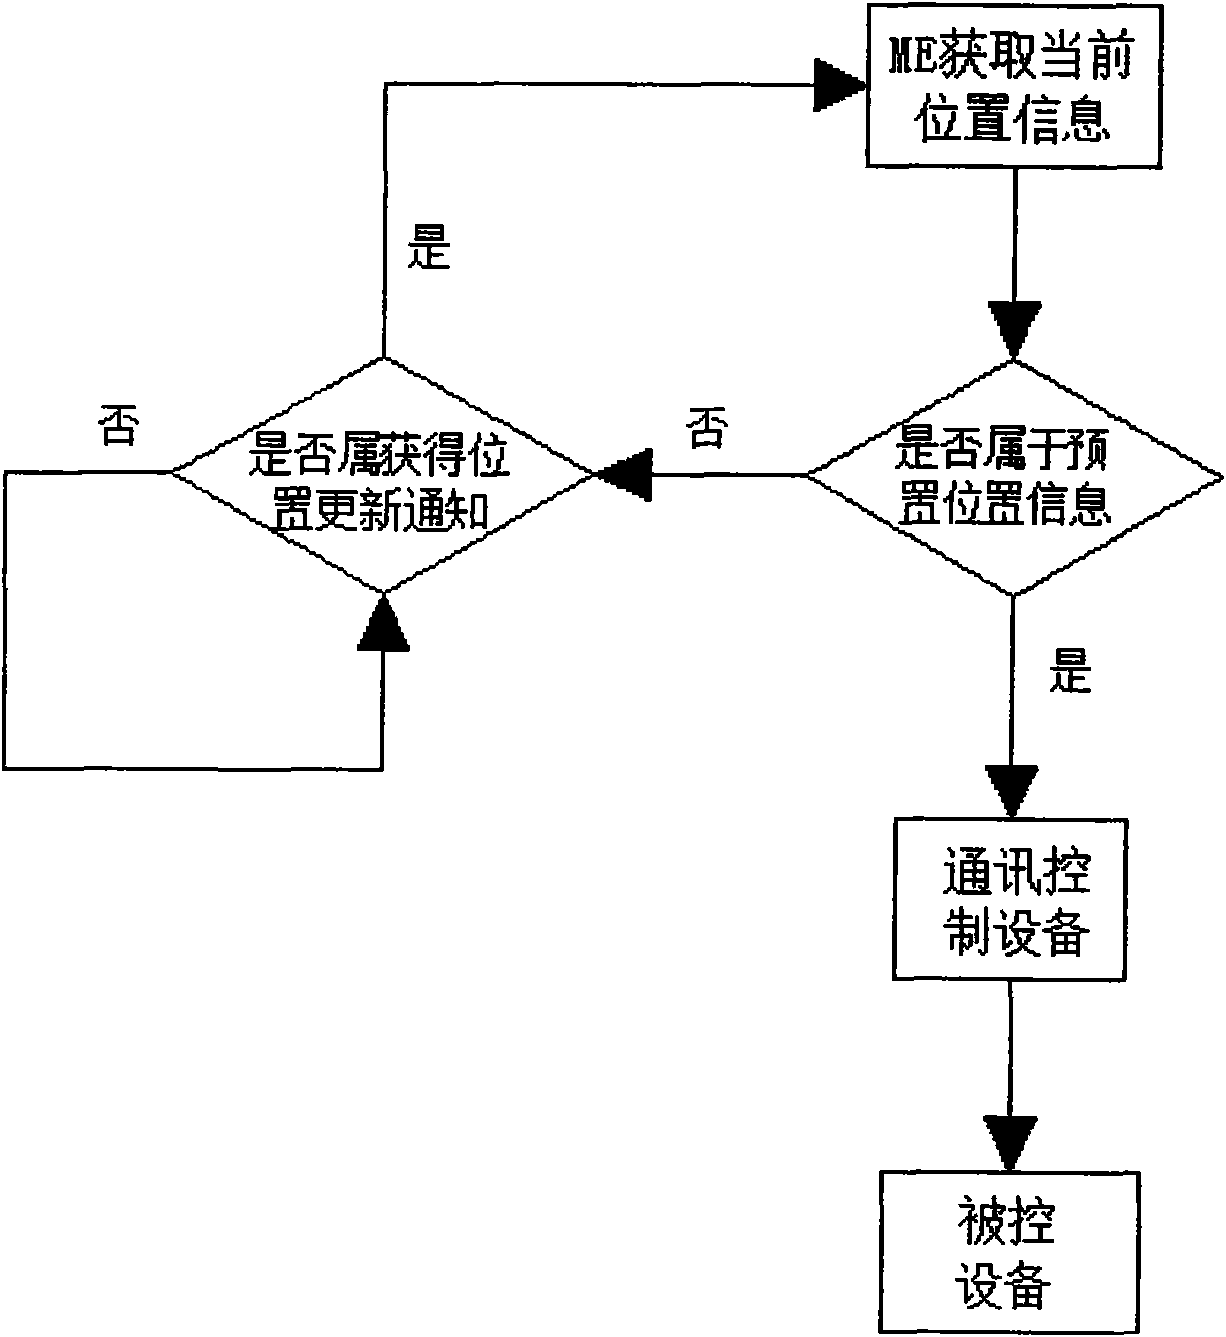 Method and device for remote control device